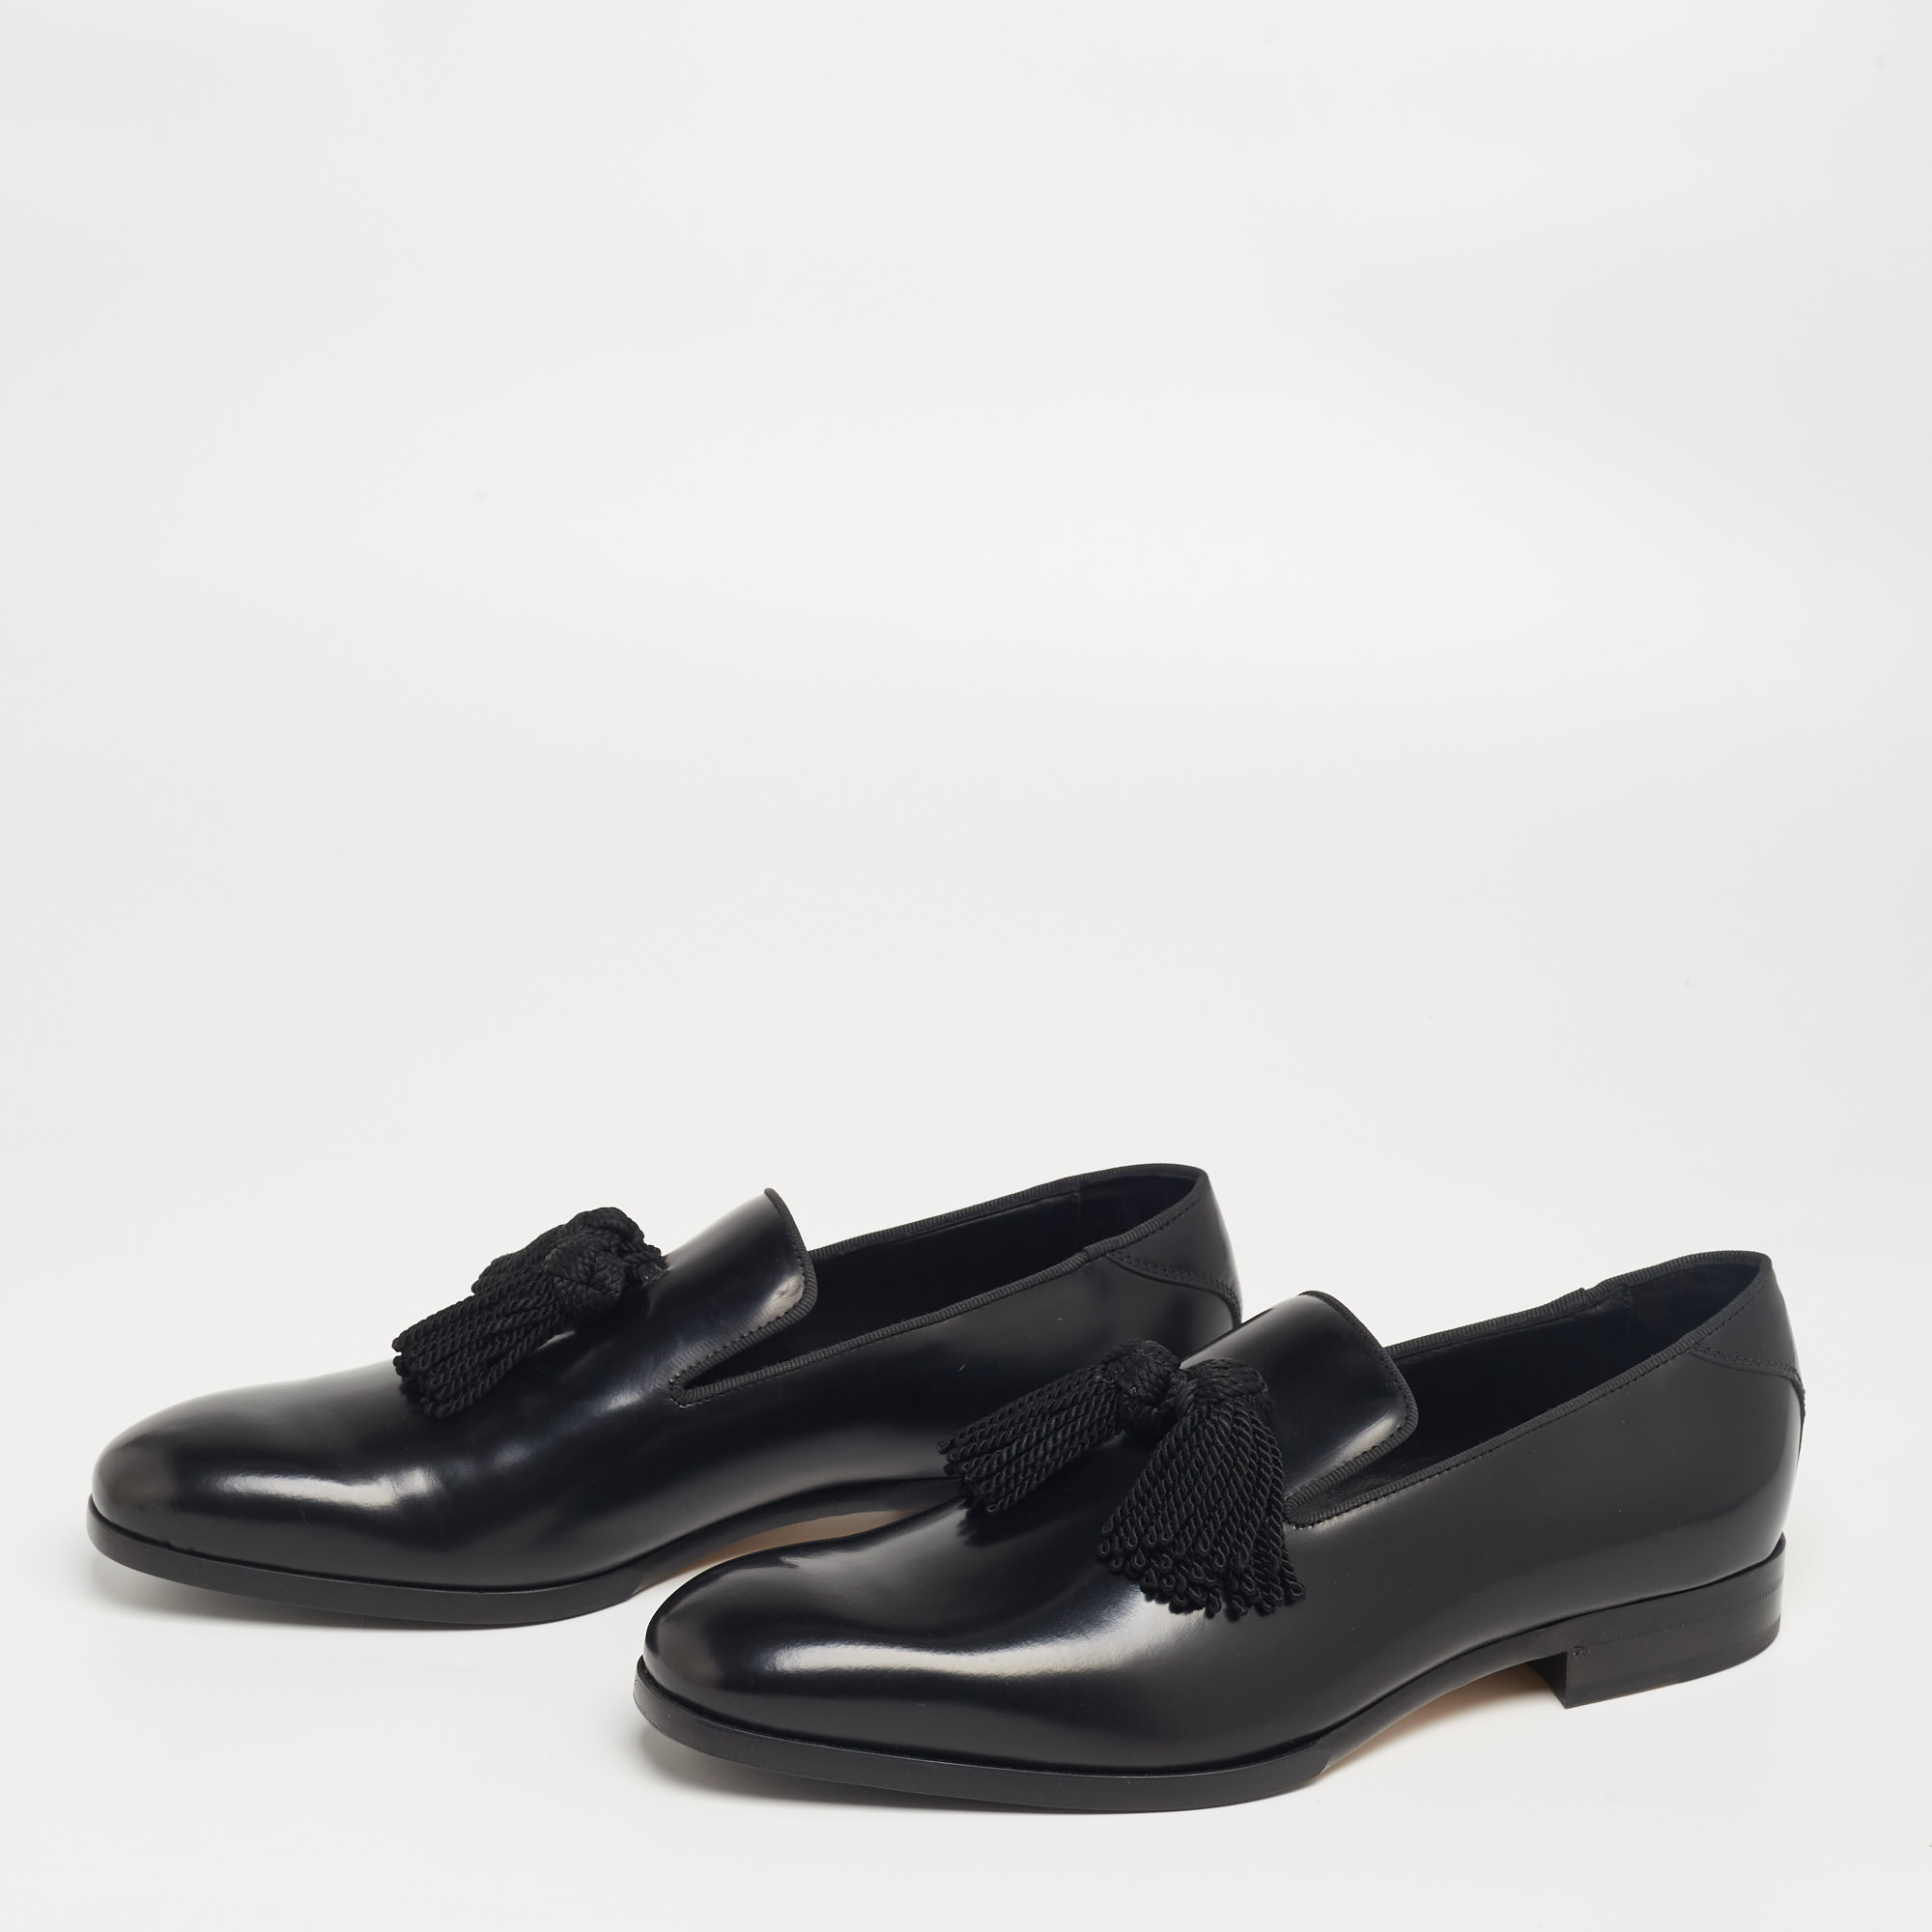 

Jimmy Choo Black Leather Foxley Tassel Loafers Size